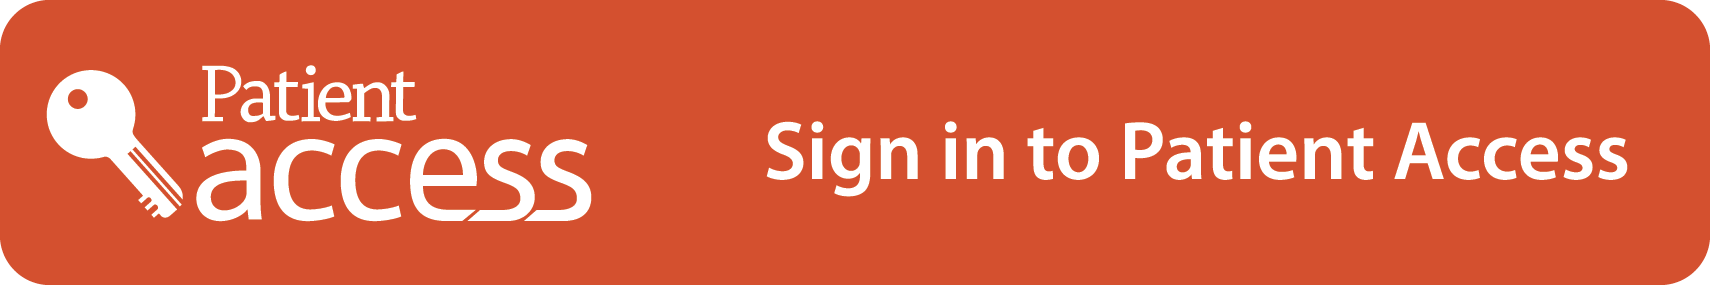 Sign in to Patient Access